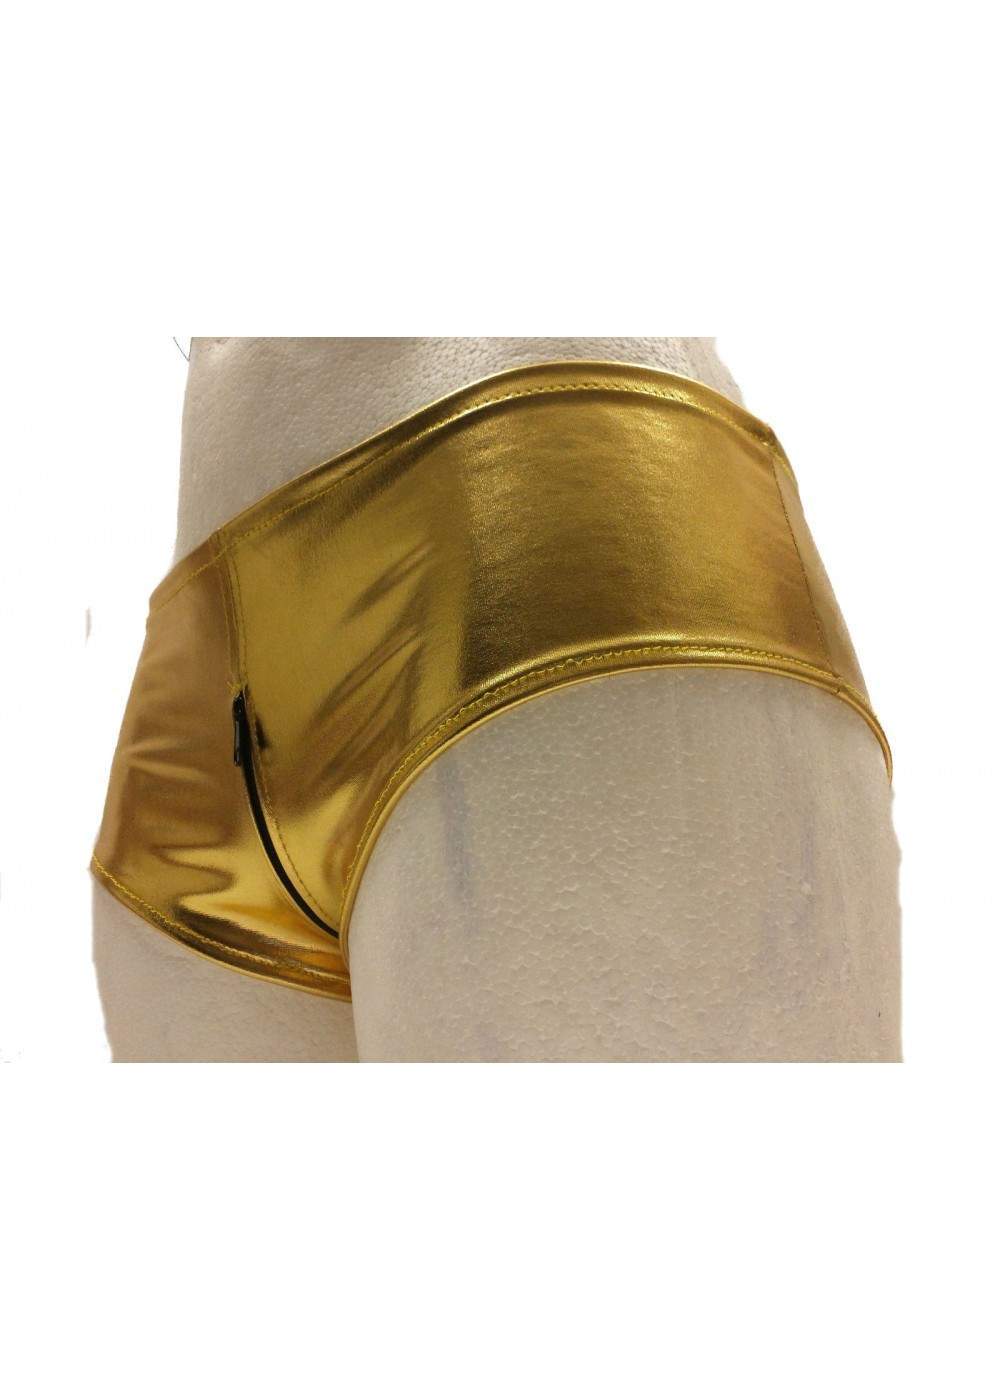 f.girth Gold Hotpants Ouvert with Zipper 15,00 € - 